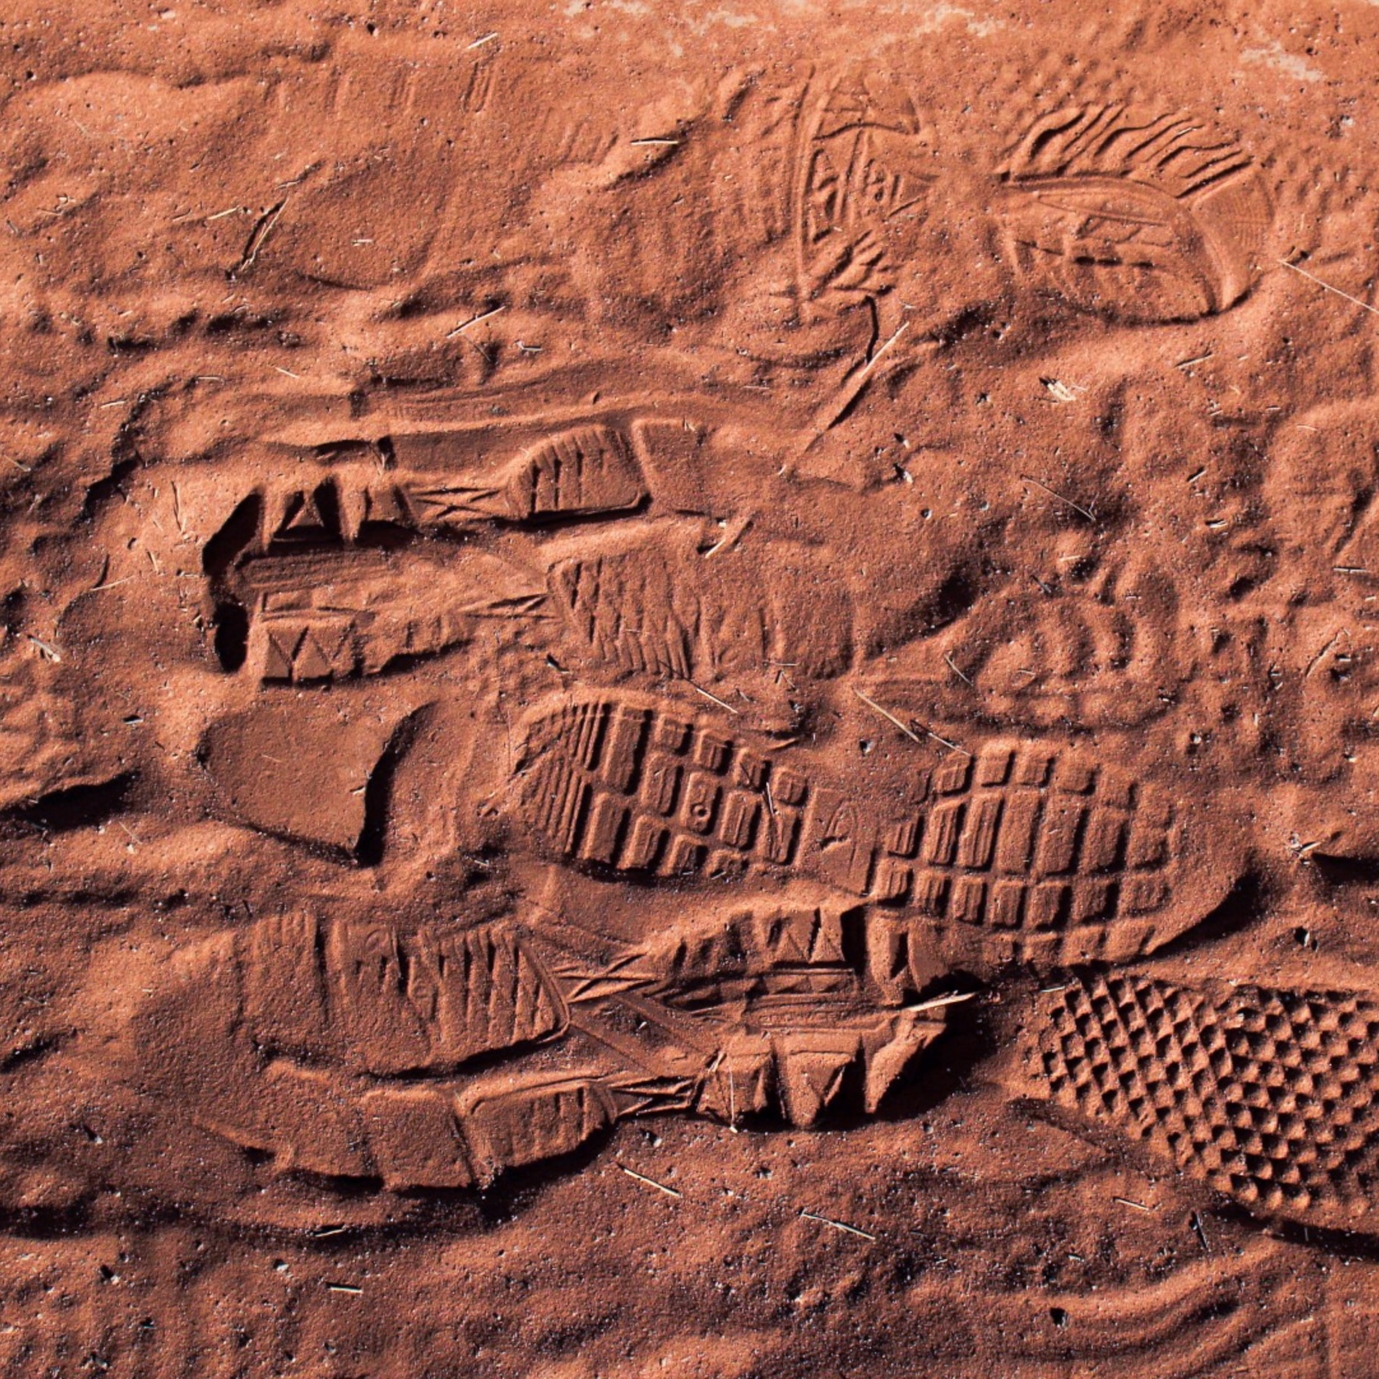 Overlapping footprints in red dirt